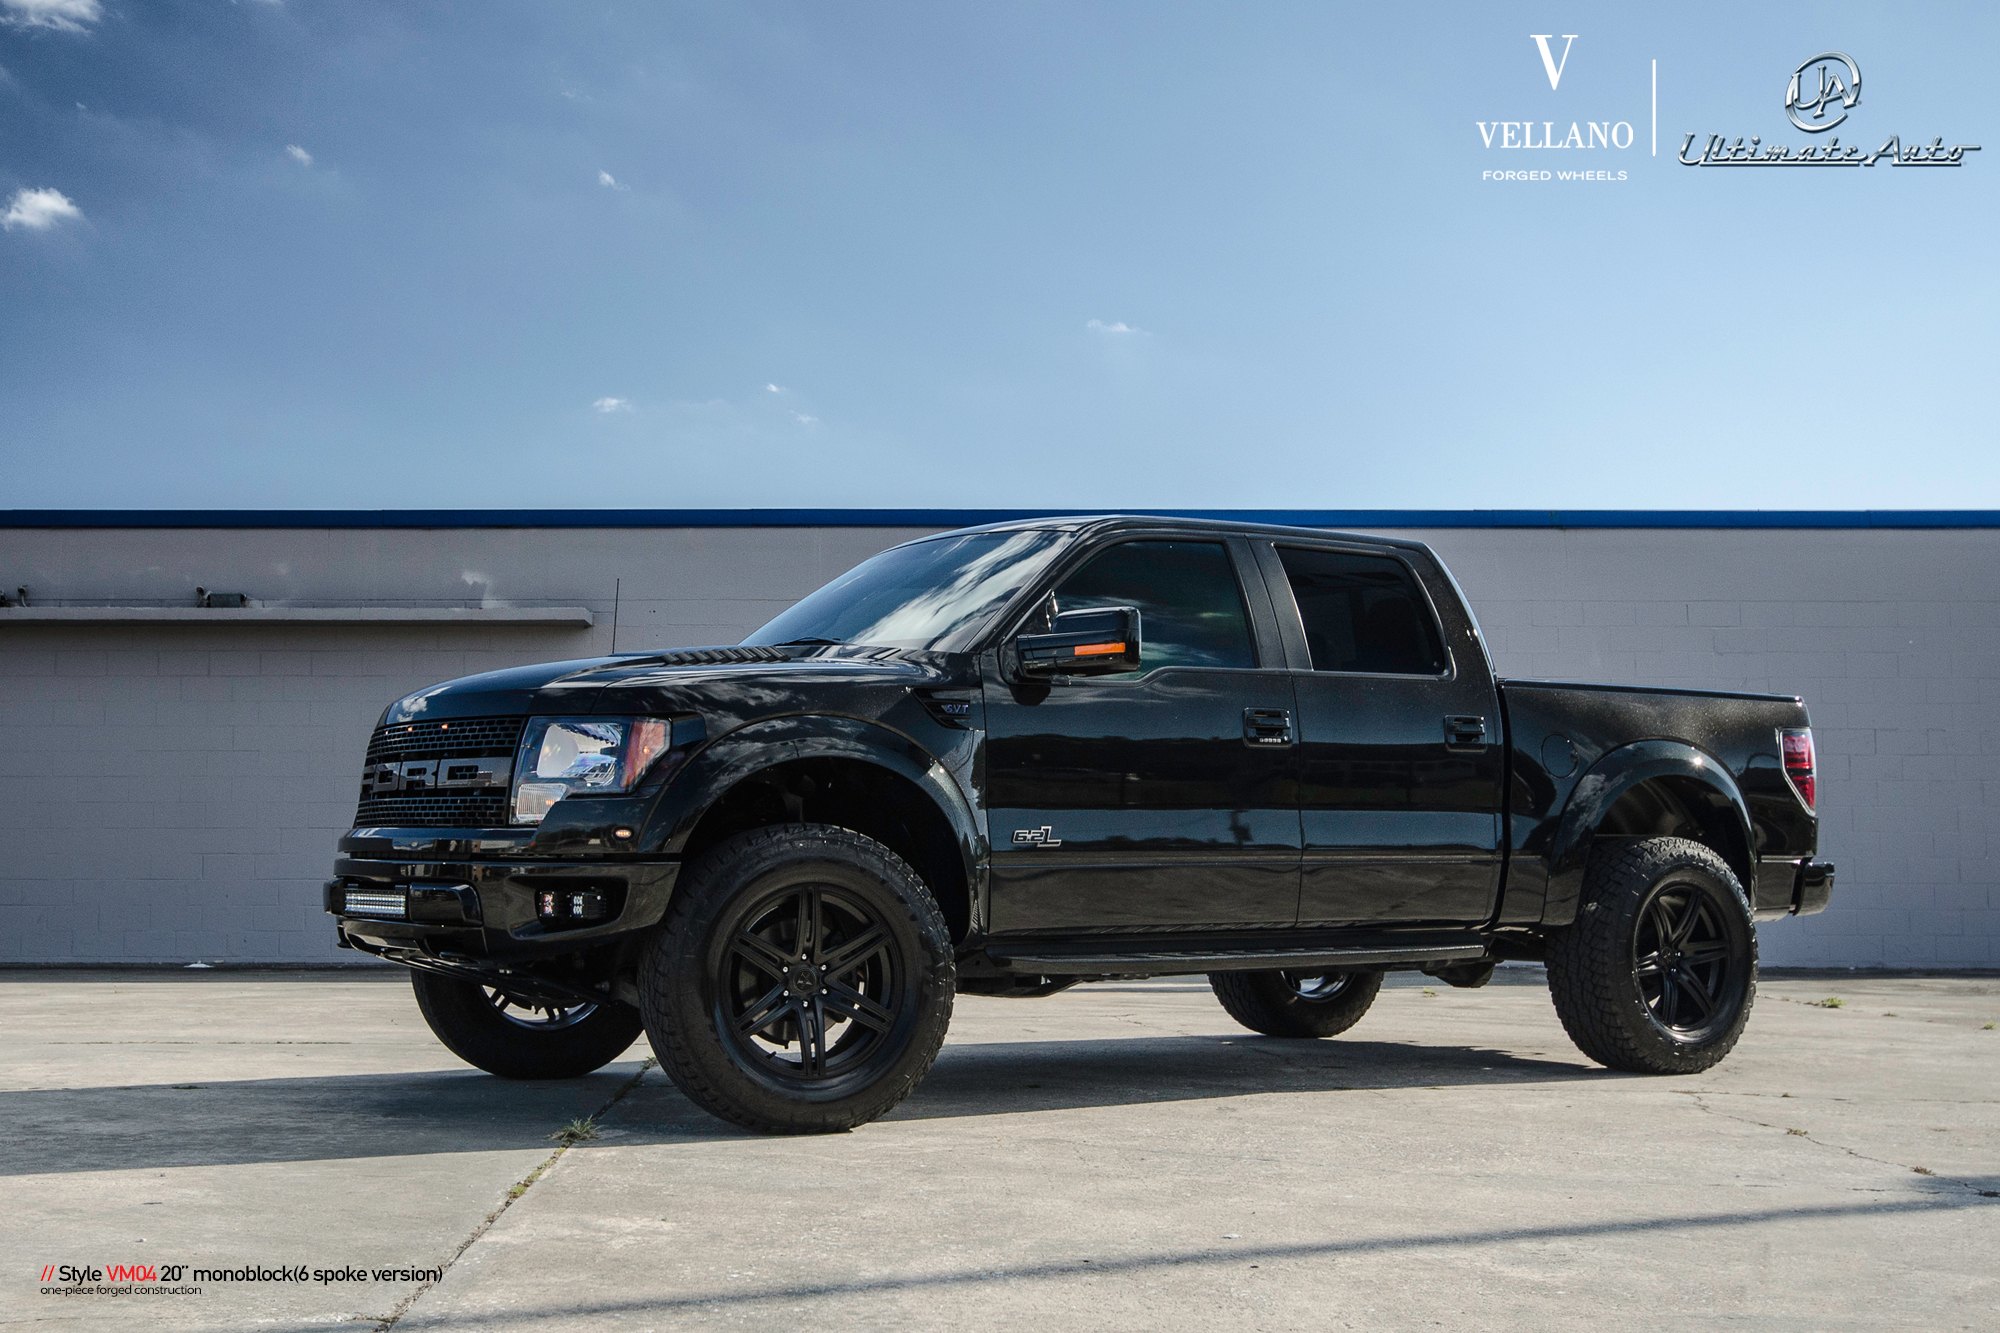 Black Lifted Ford F-150 with Custom Front Bumper - Photo by Vellano